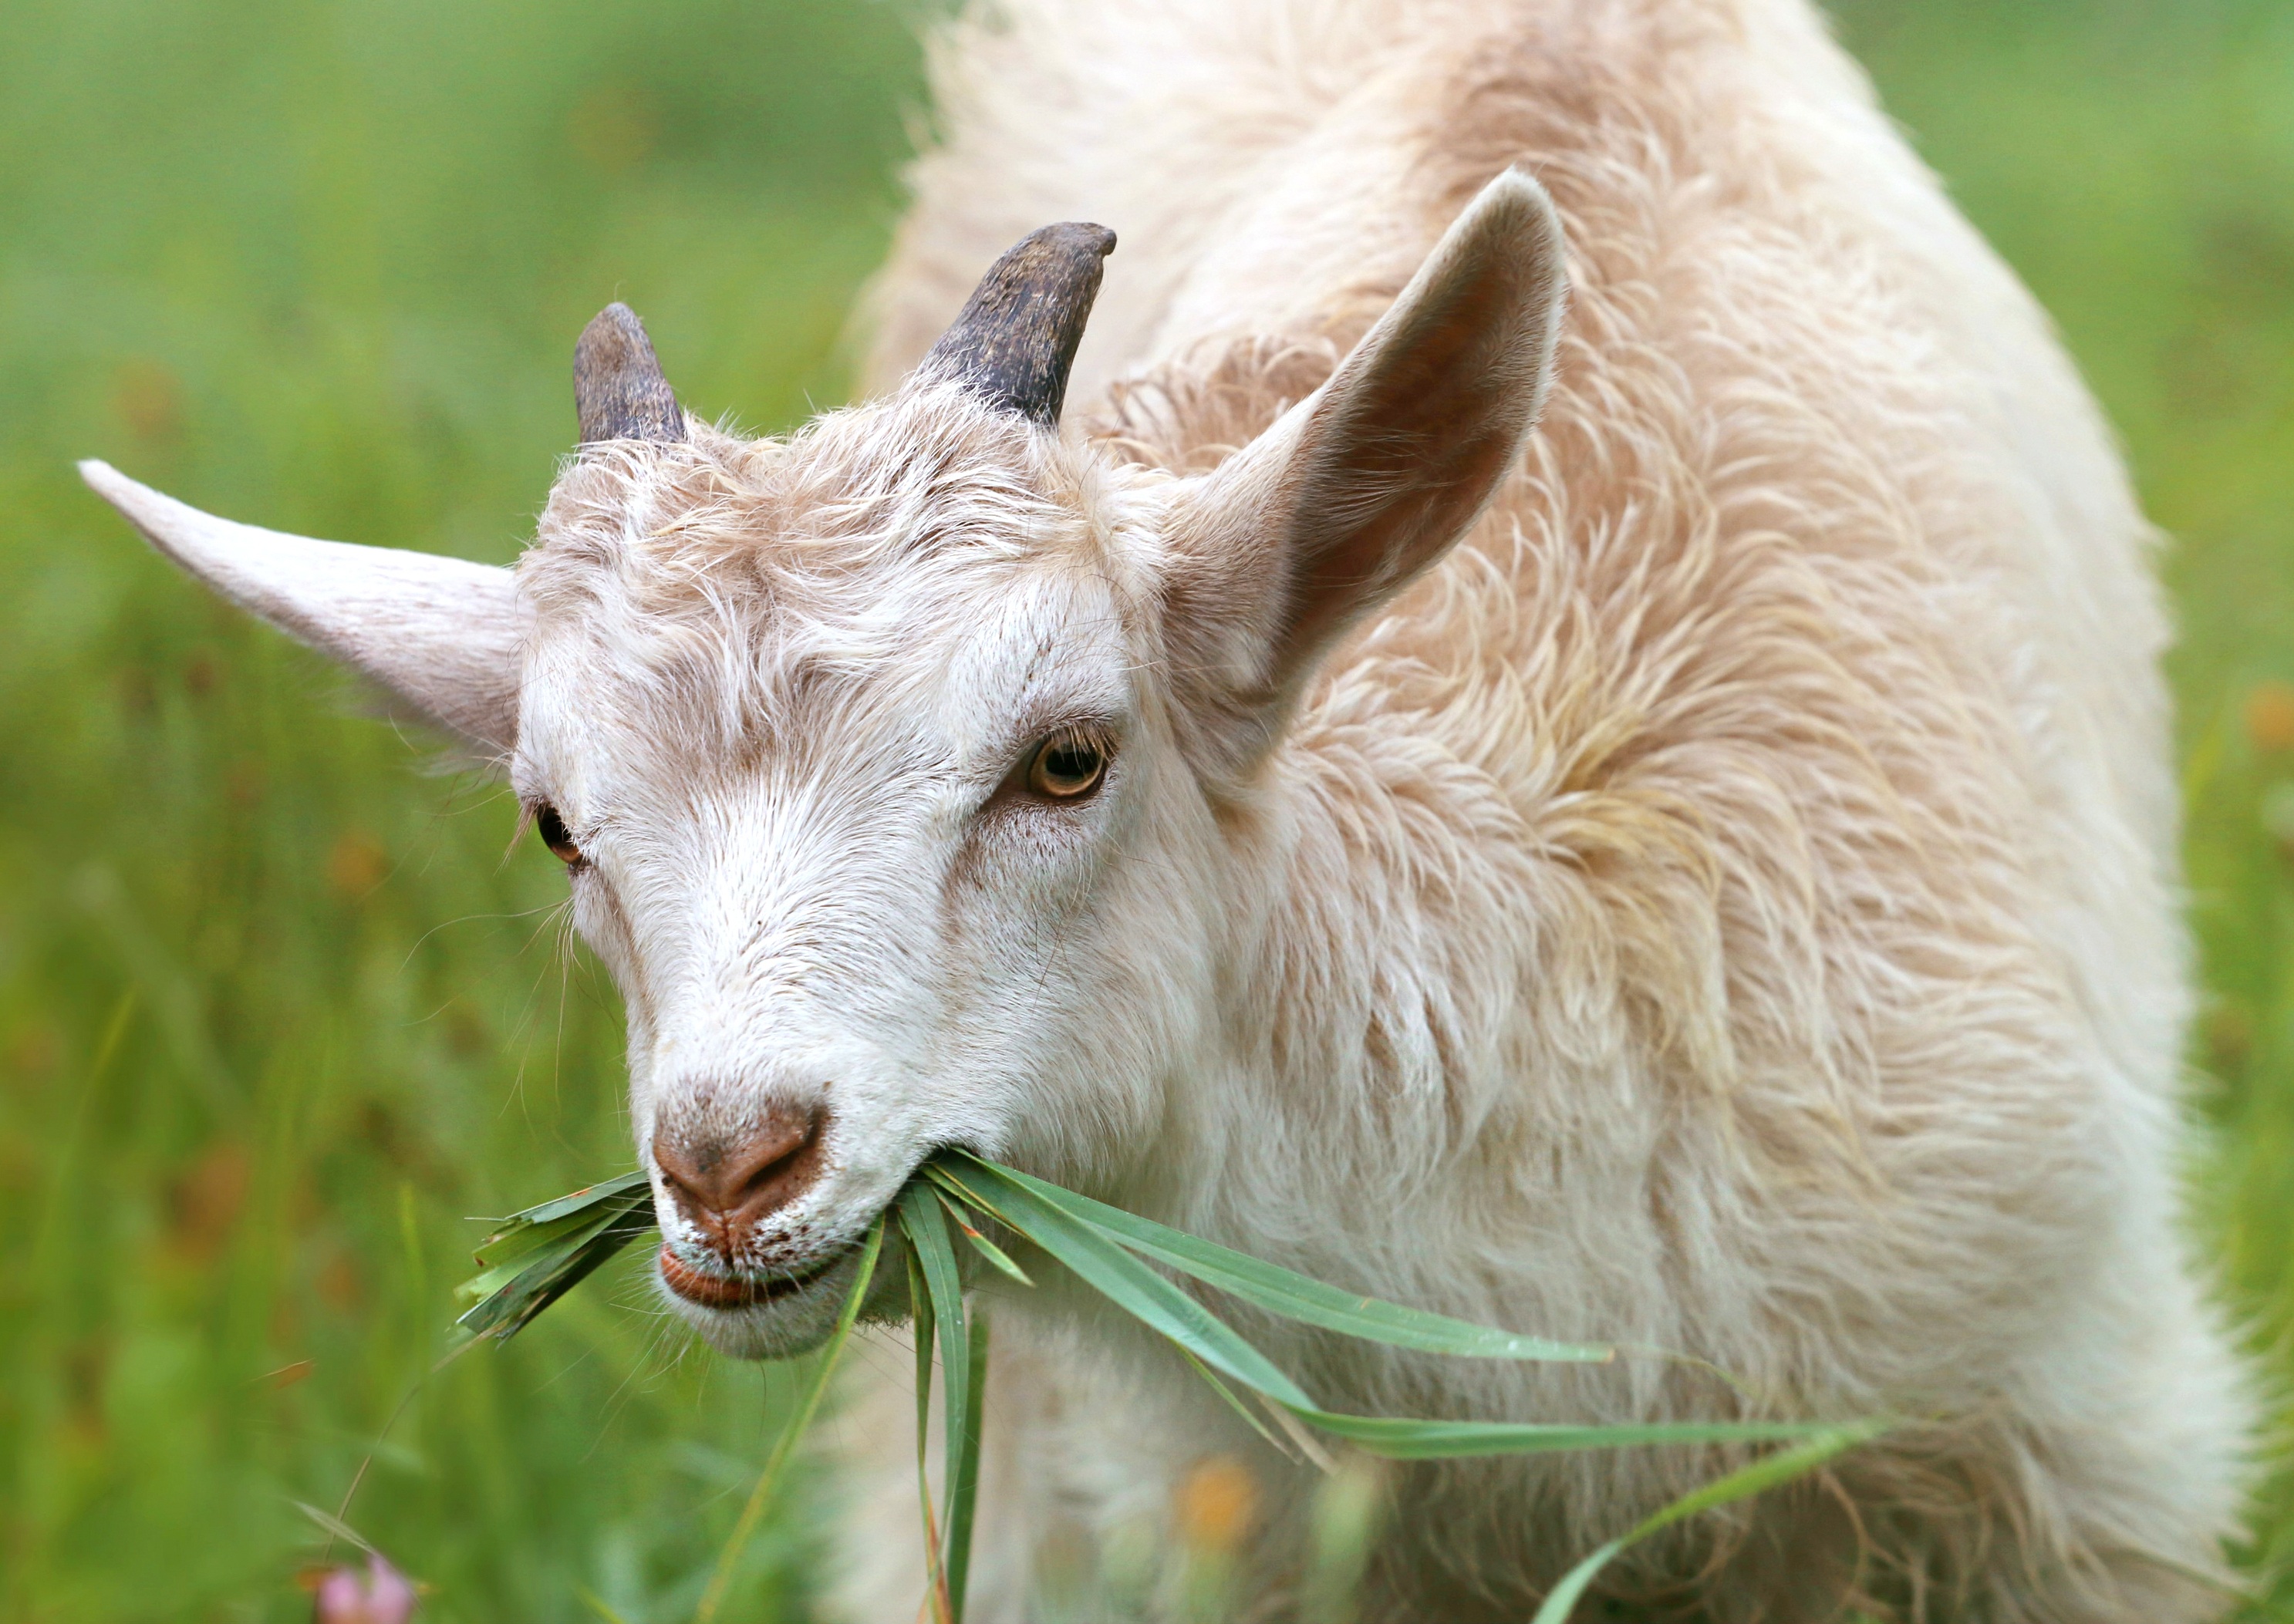 A goat chewing grass